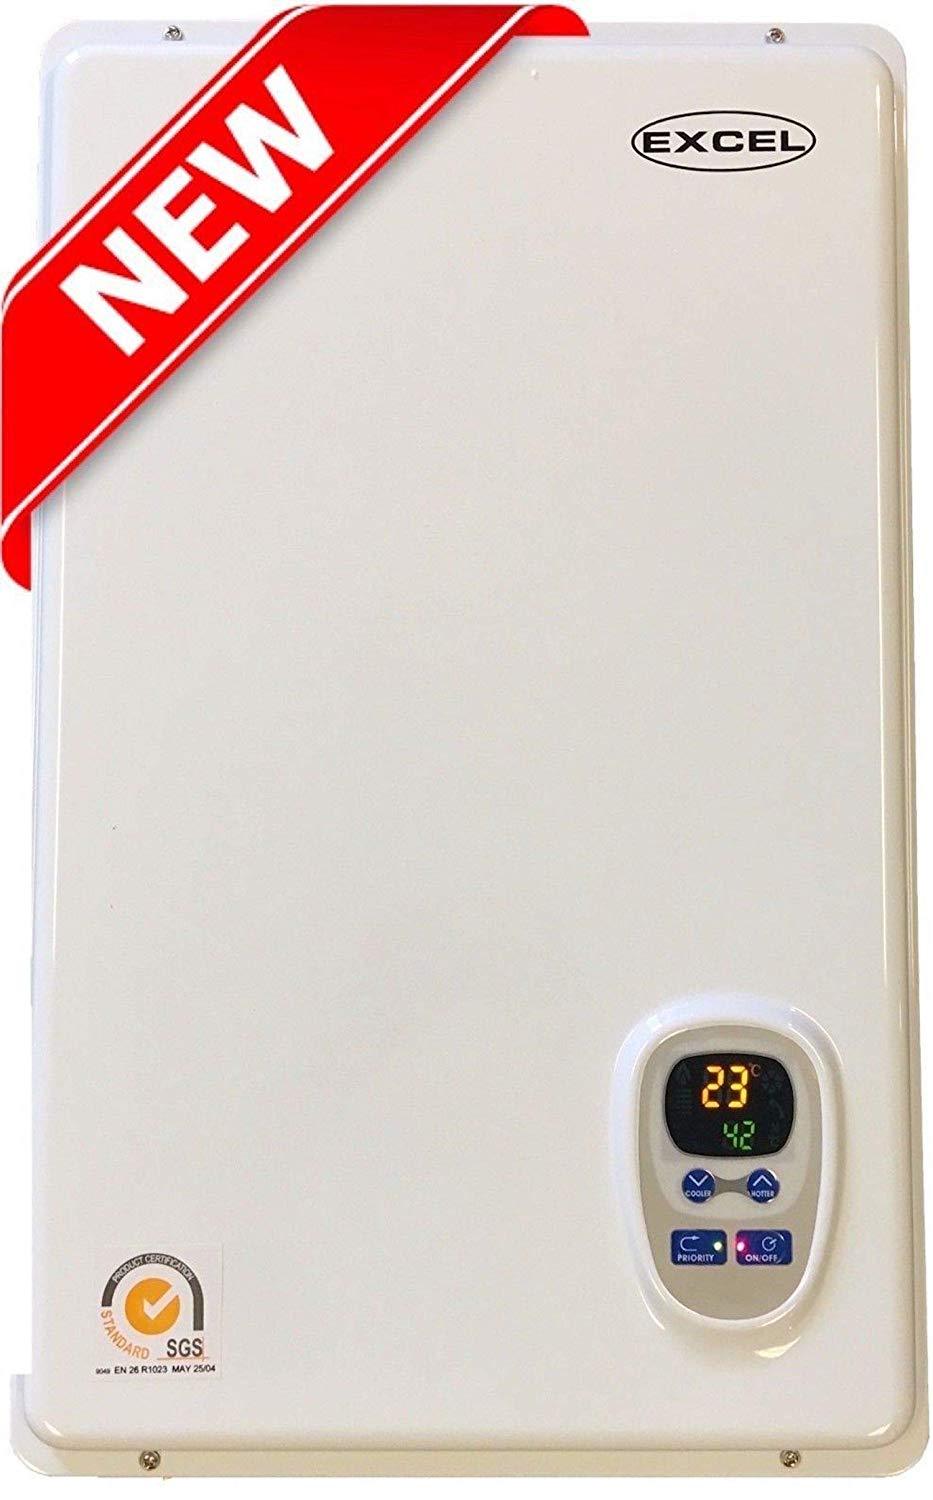 Excel, Excel 10009 Pro 6.6 GPM Liquid Propane LP Tankless Water Heater Whole House with Flue Kit New